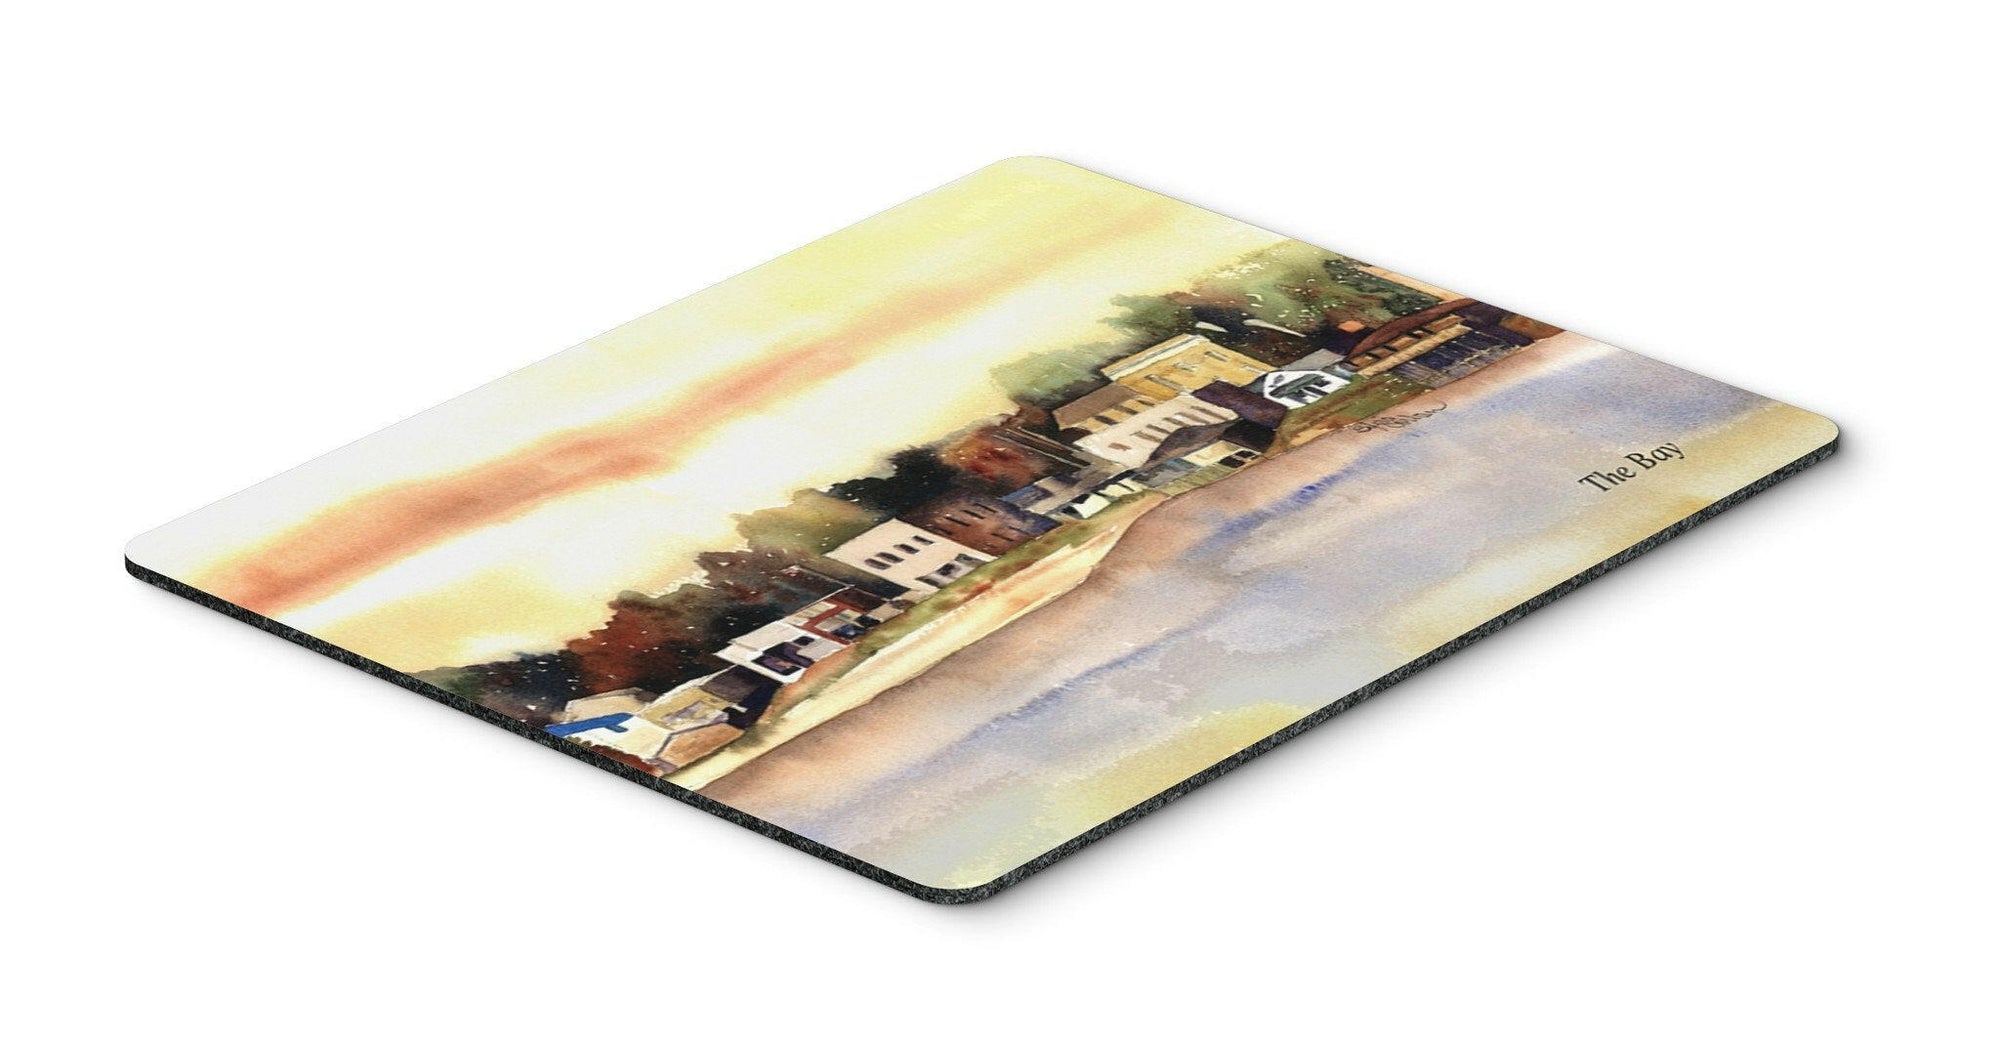 The Pass Mouse pad, hot pad, or trivet by Caroline's Treasures